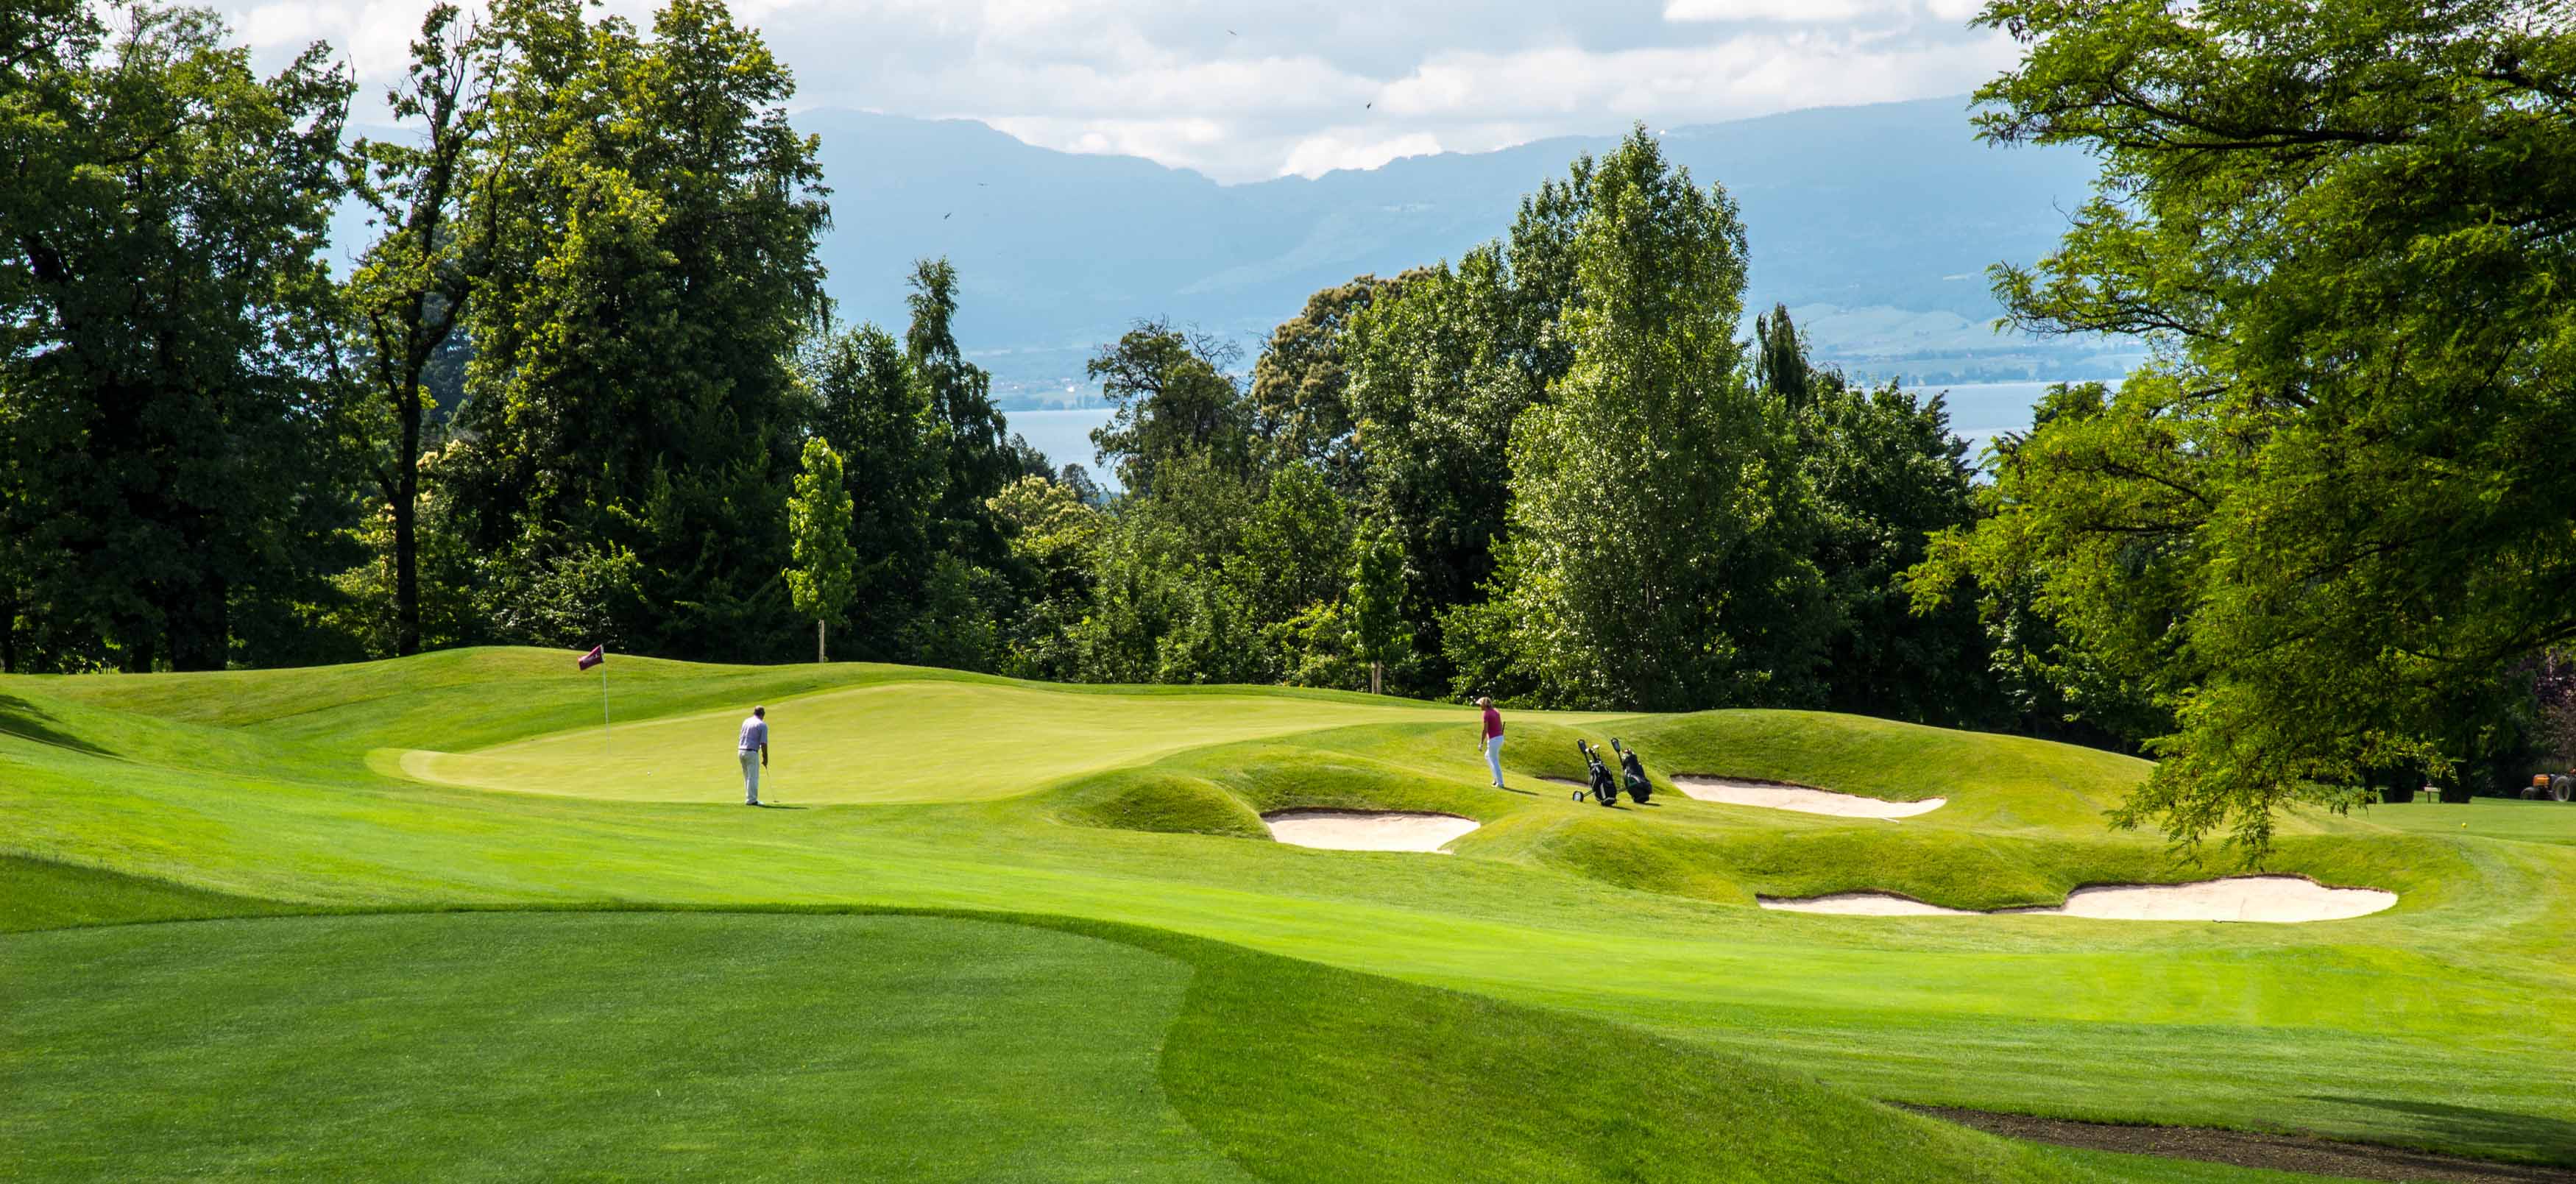 GOLF Course in EVIAN (France, Europe) - Luxury Resort / Stay, Weekend